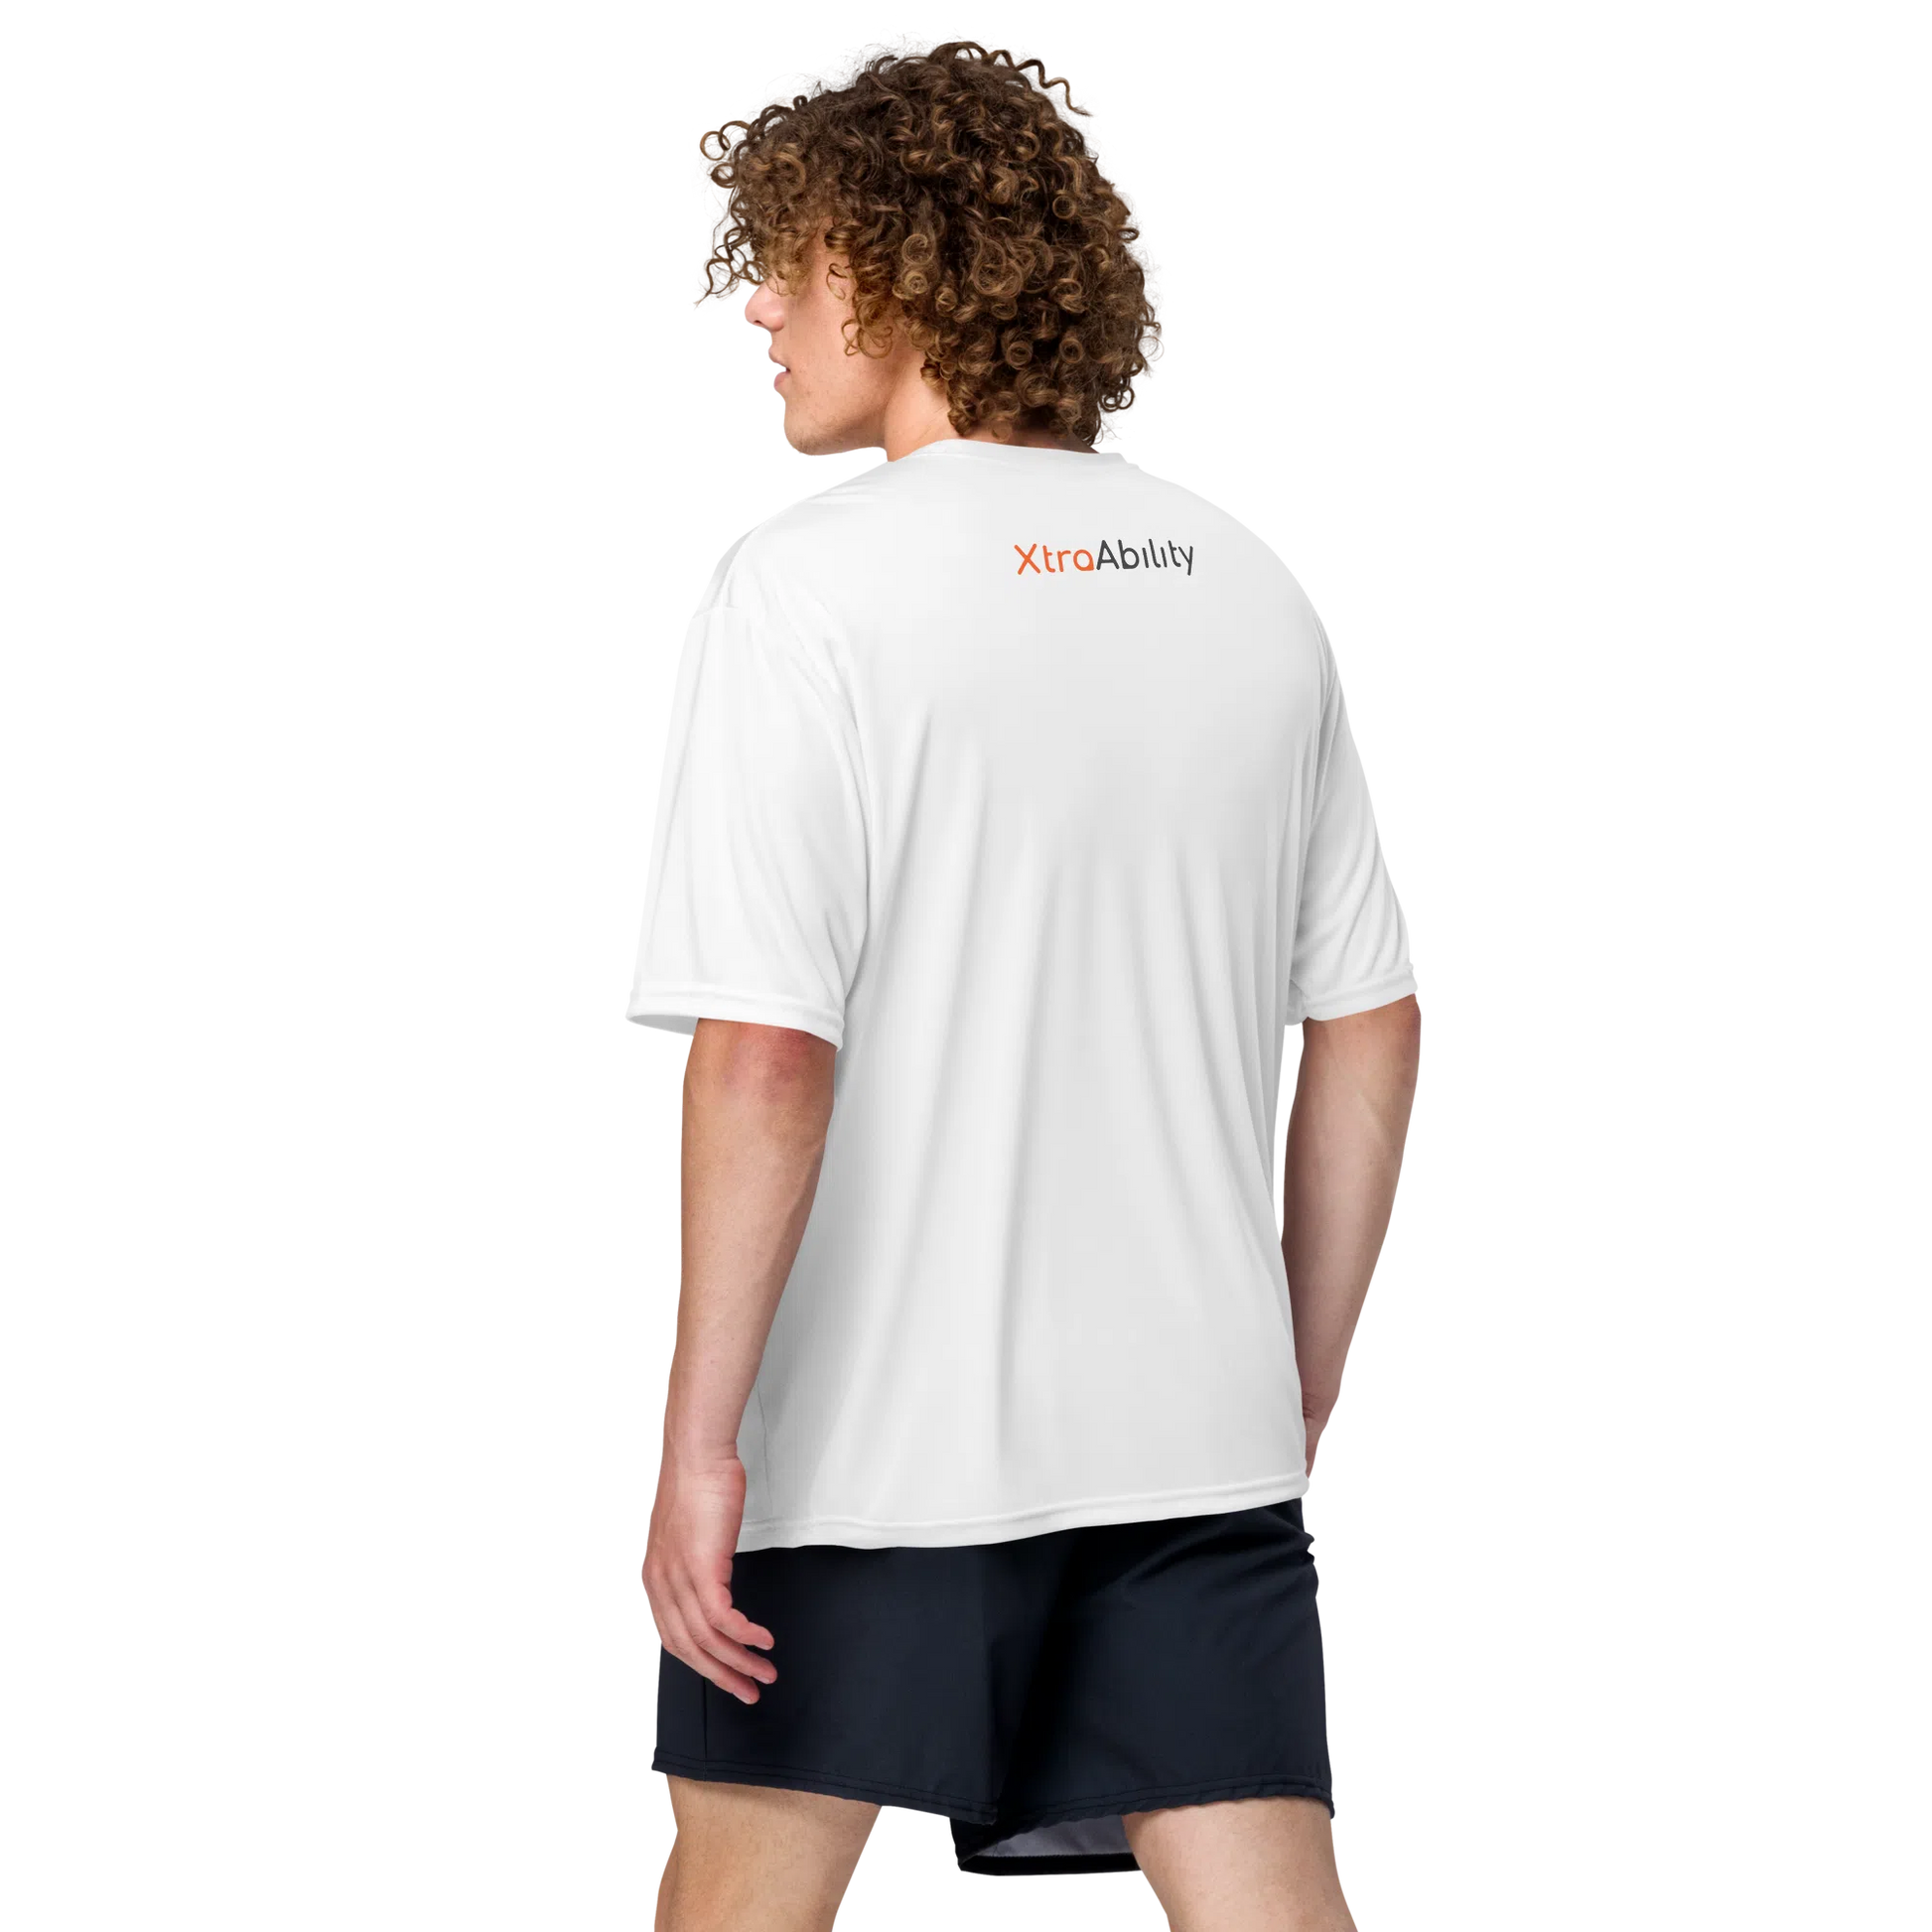 Advanced Men's Performance Crew Neck T-Shirt - Stay Cool and Comfortable in Any Activity